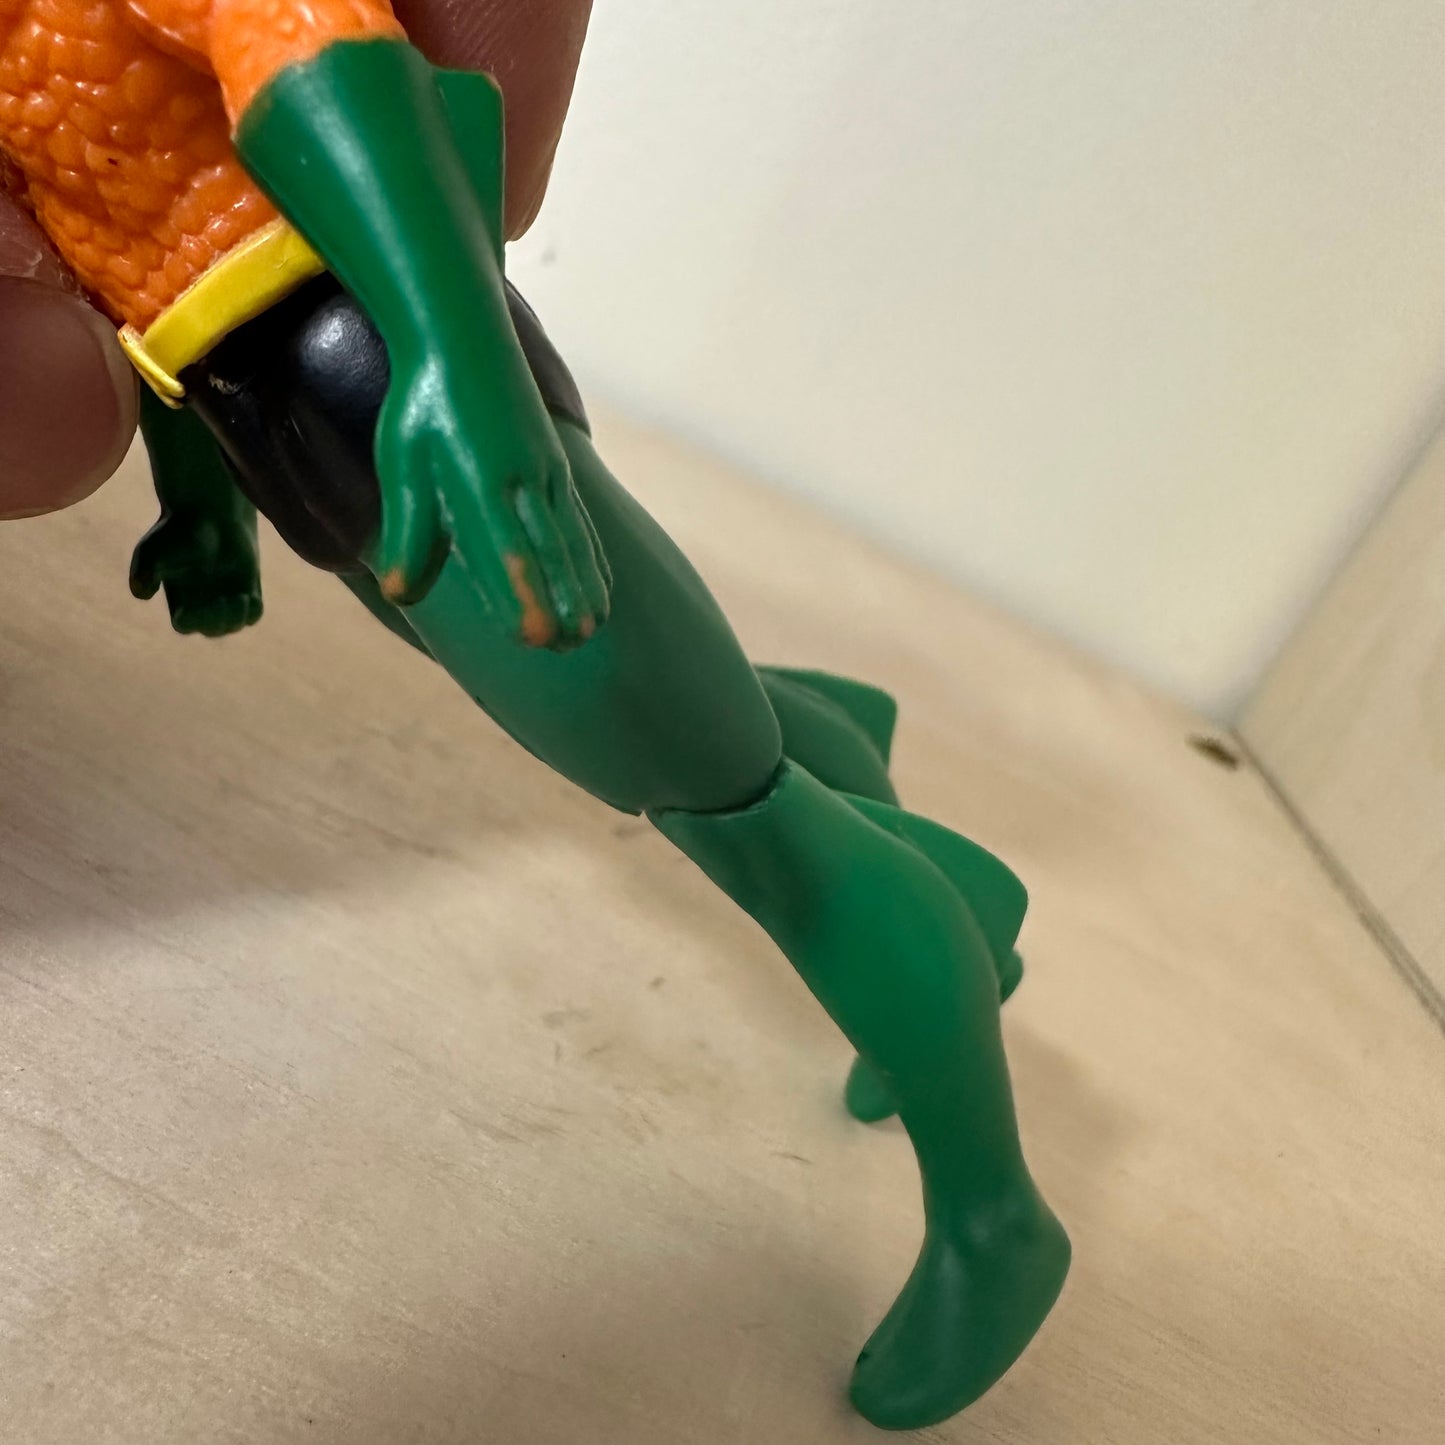 1984 Kenner Super Powers Aquaman Incomplete DC Comics Action Figure Toy